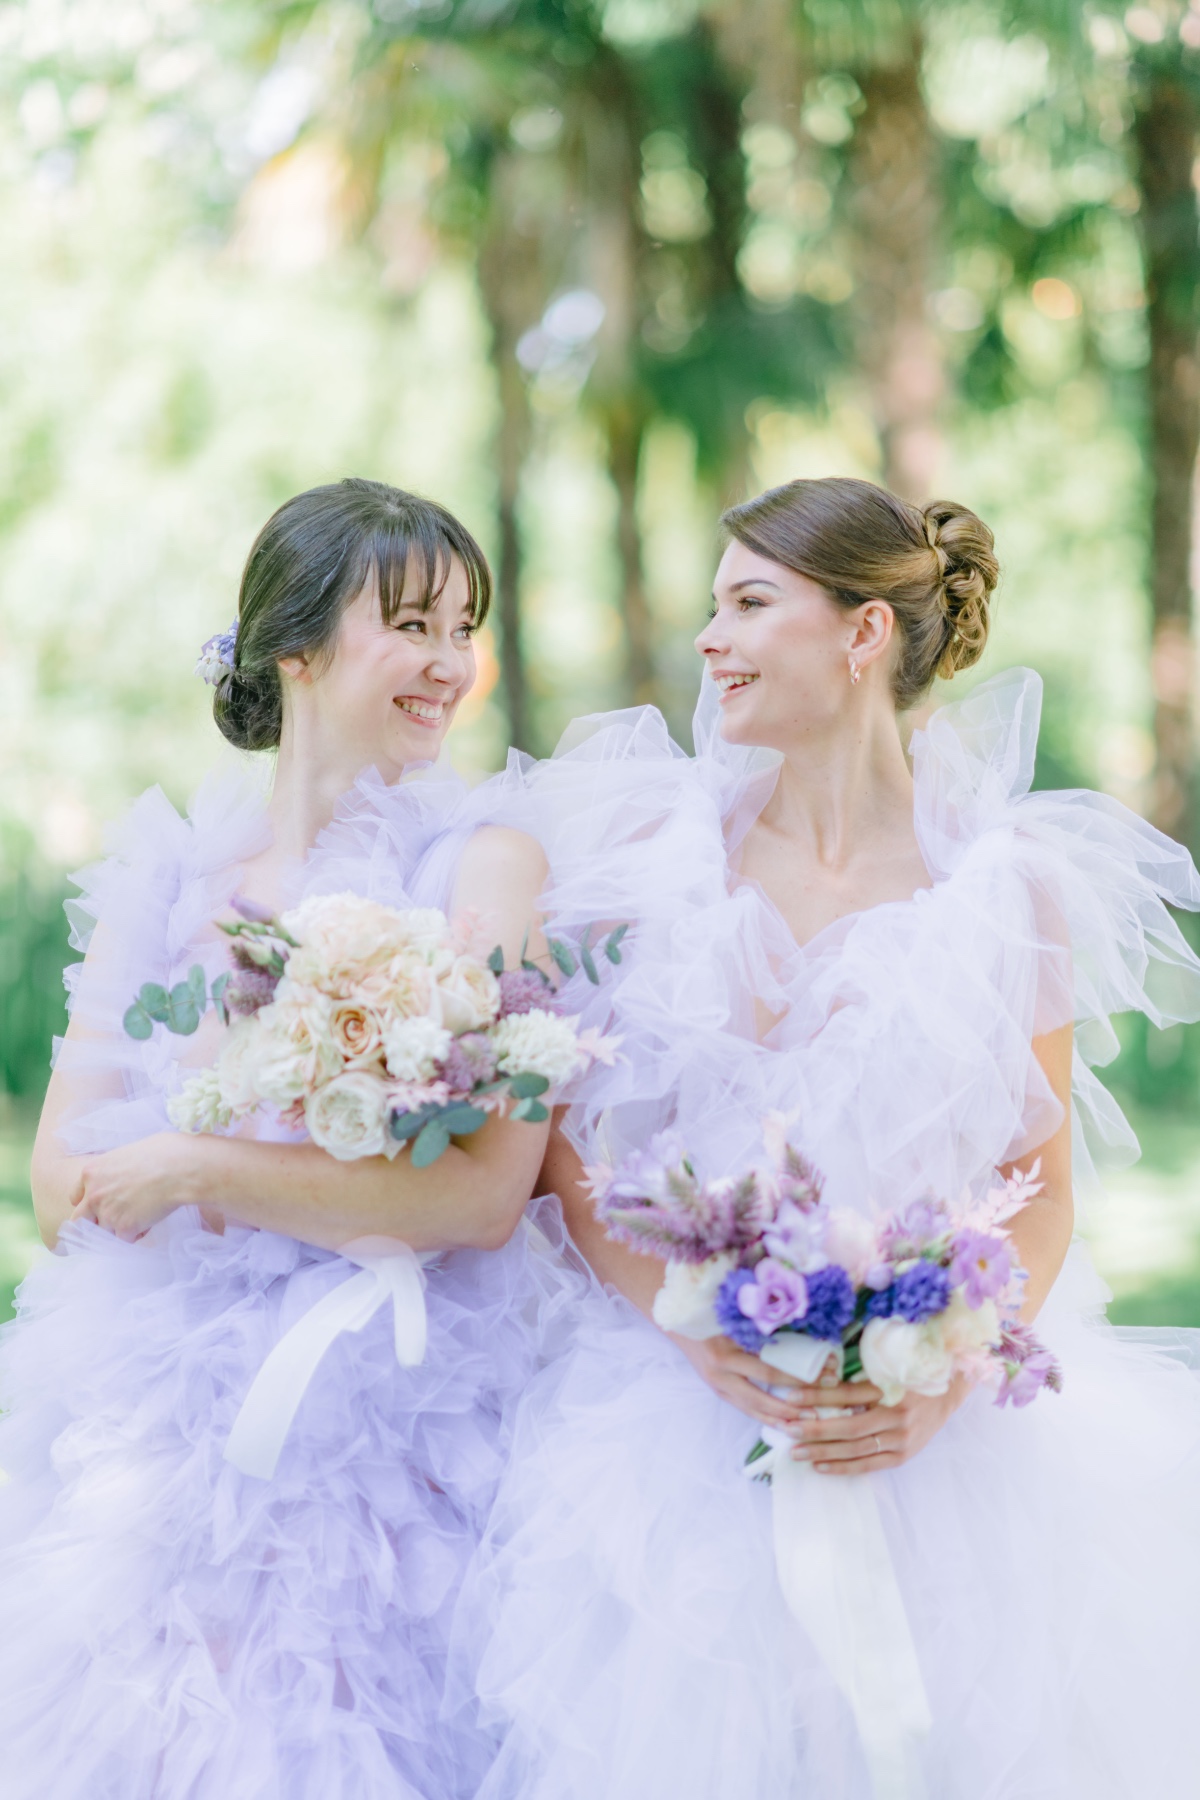 Portrait of bride and bridesmaid in tulle dresses holding bouquets